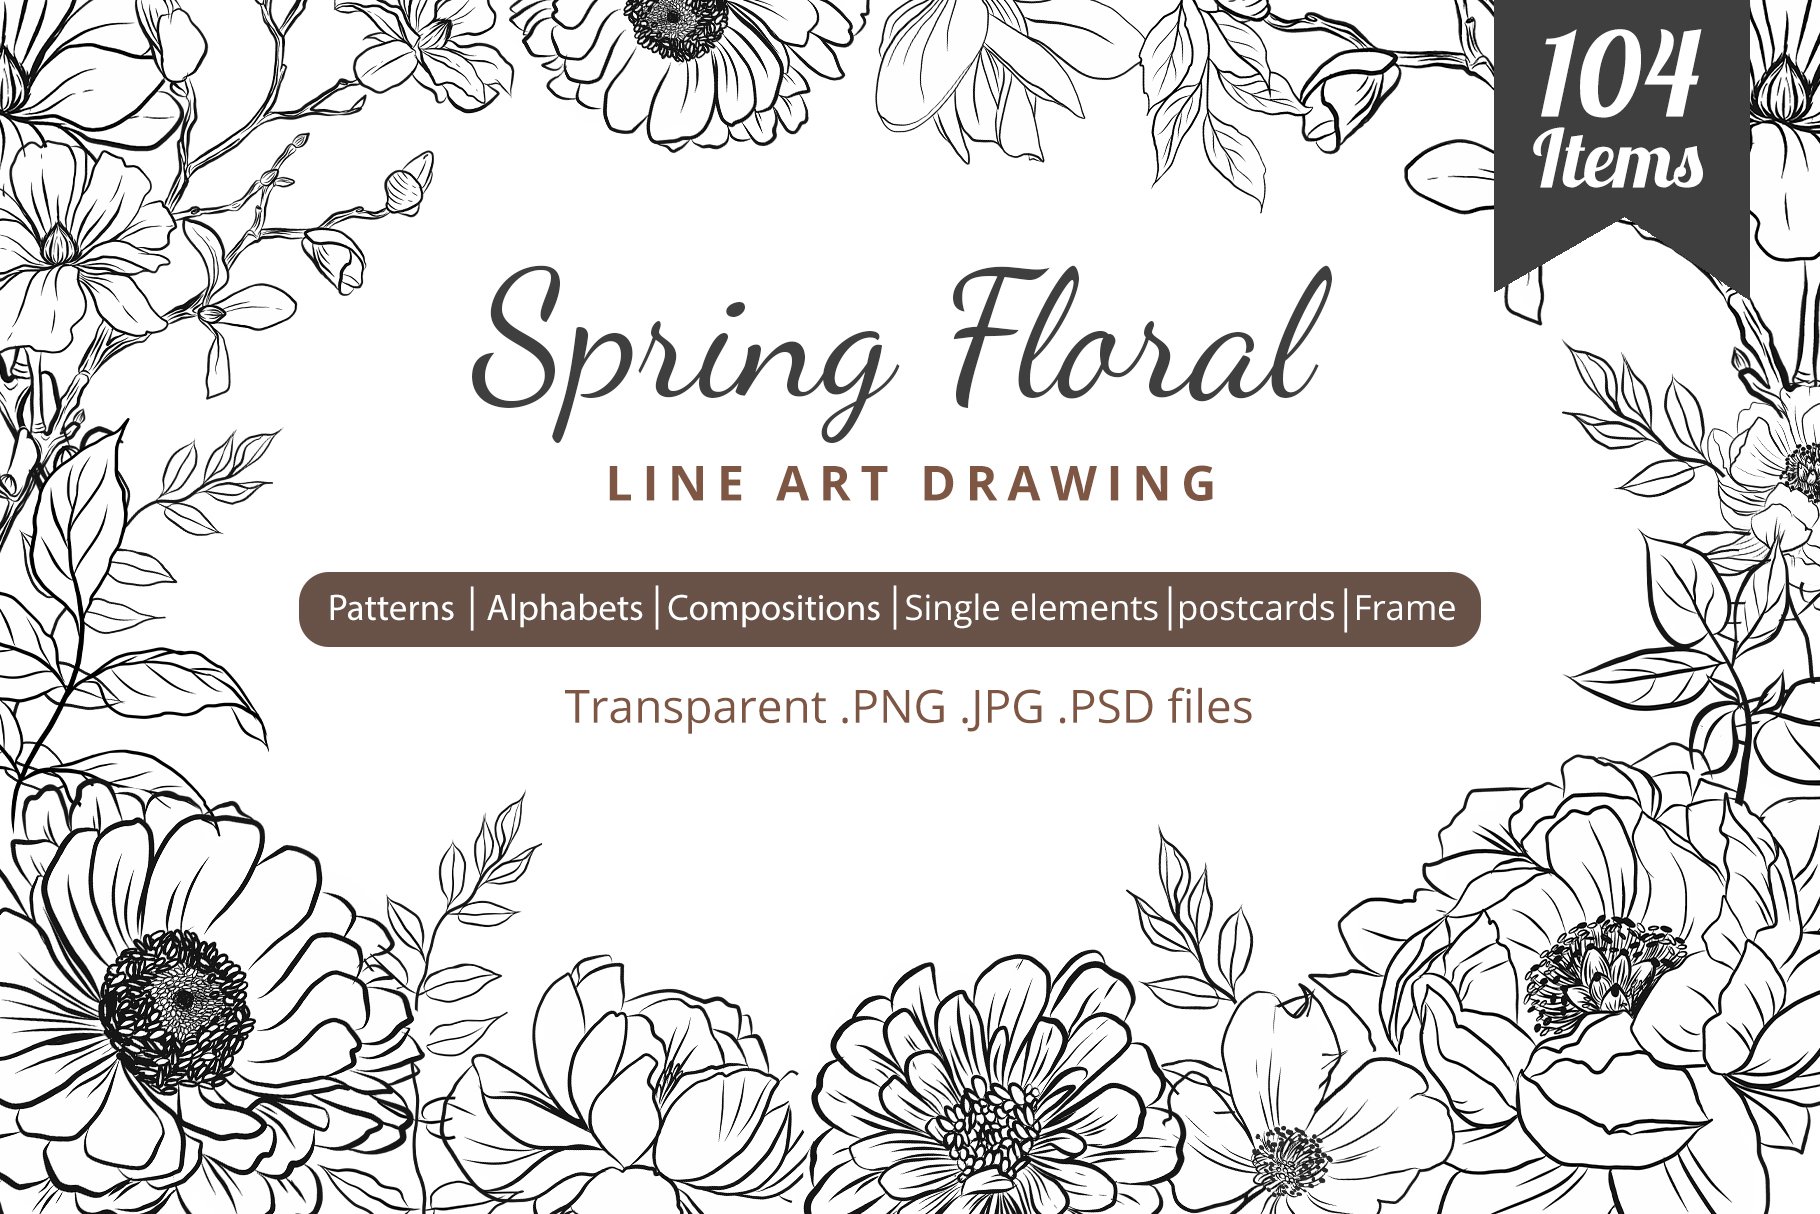 Spring Floral Line Art Drawing Design Cuts